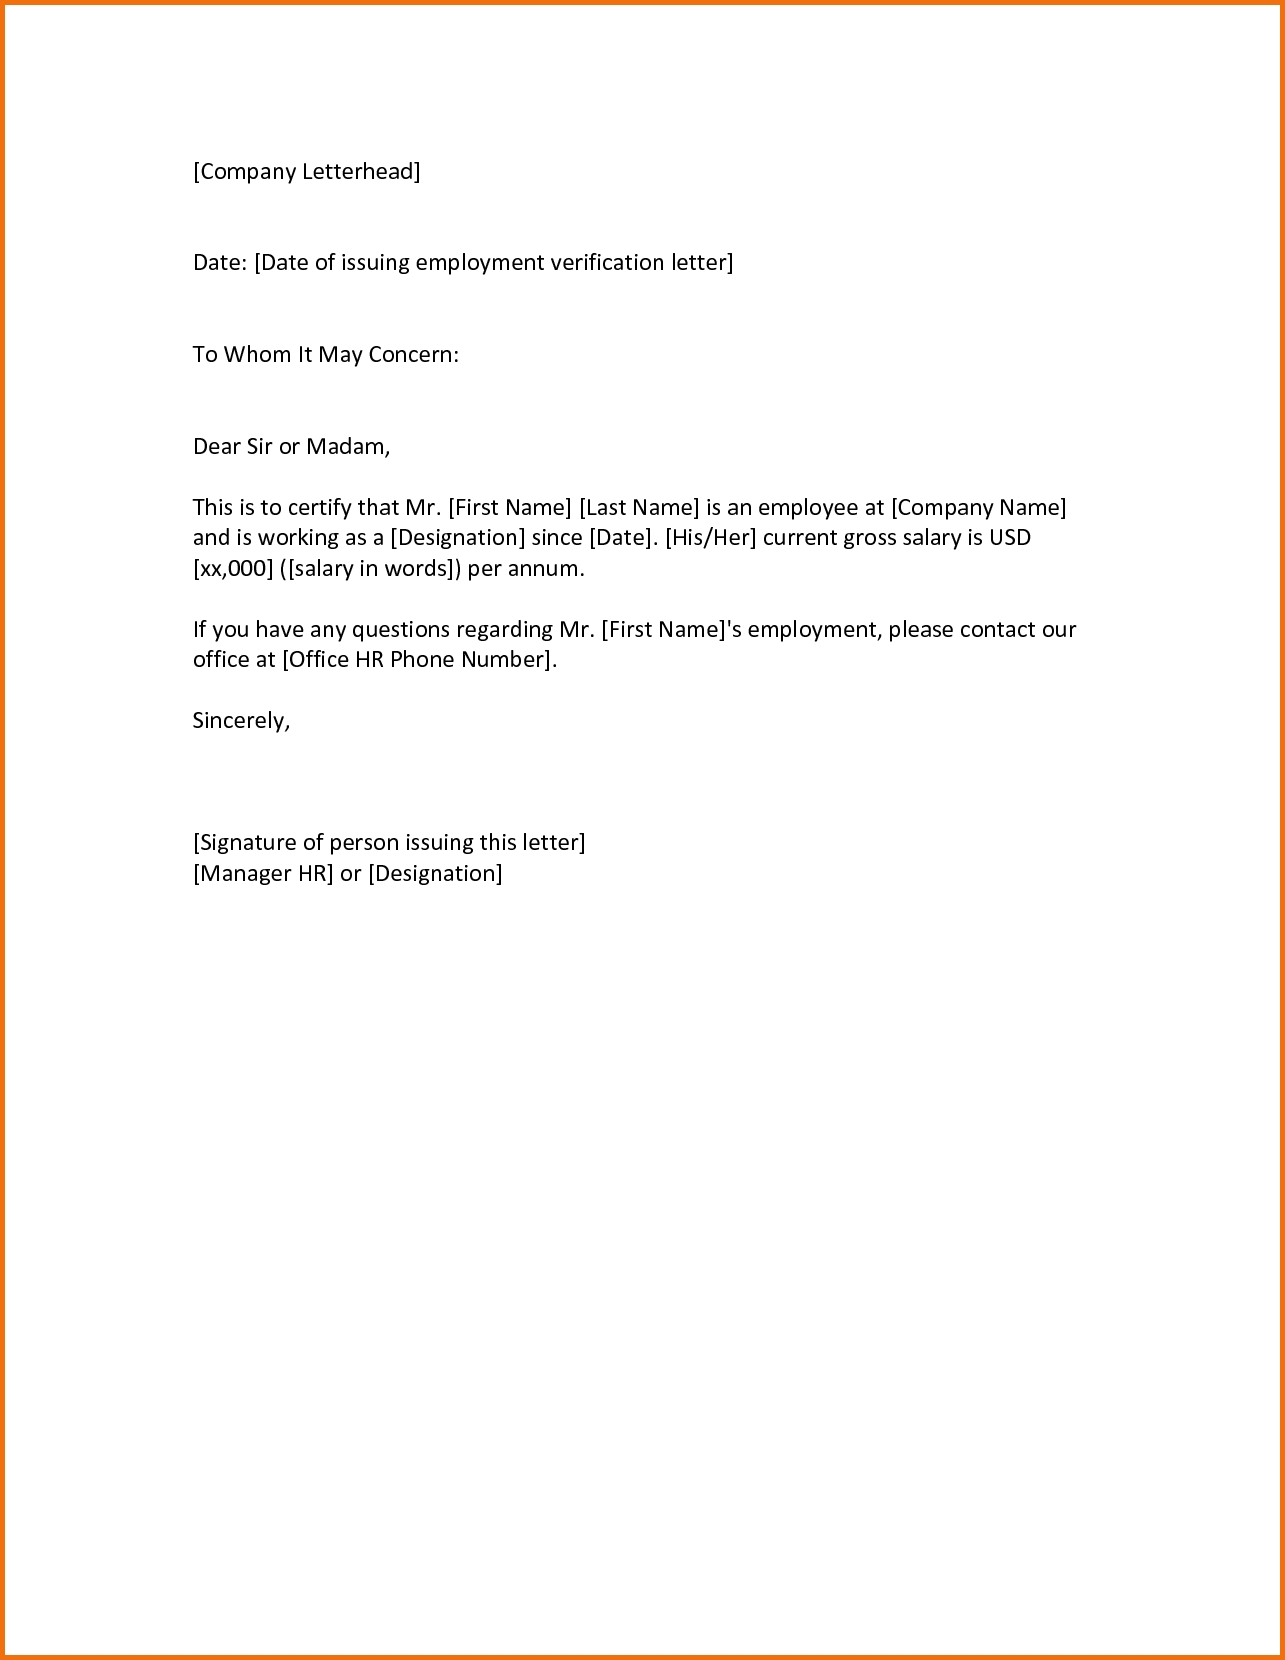 To Whom It May Concern Letter Employment Verification | The Letter 